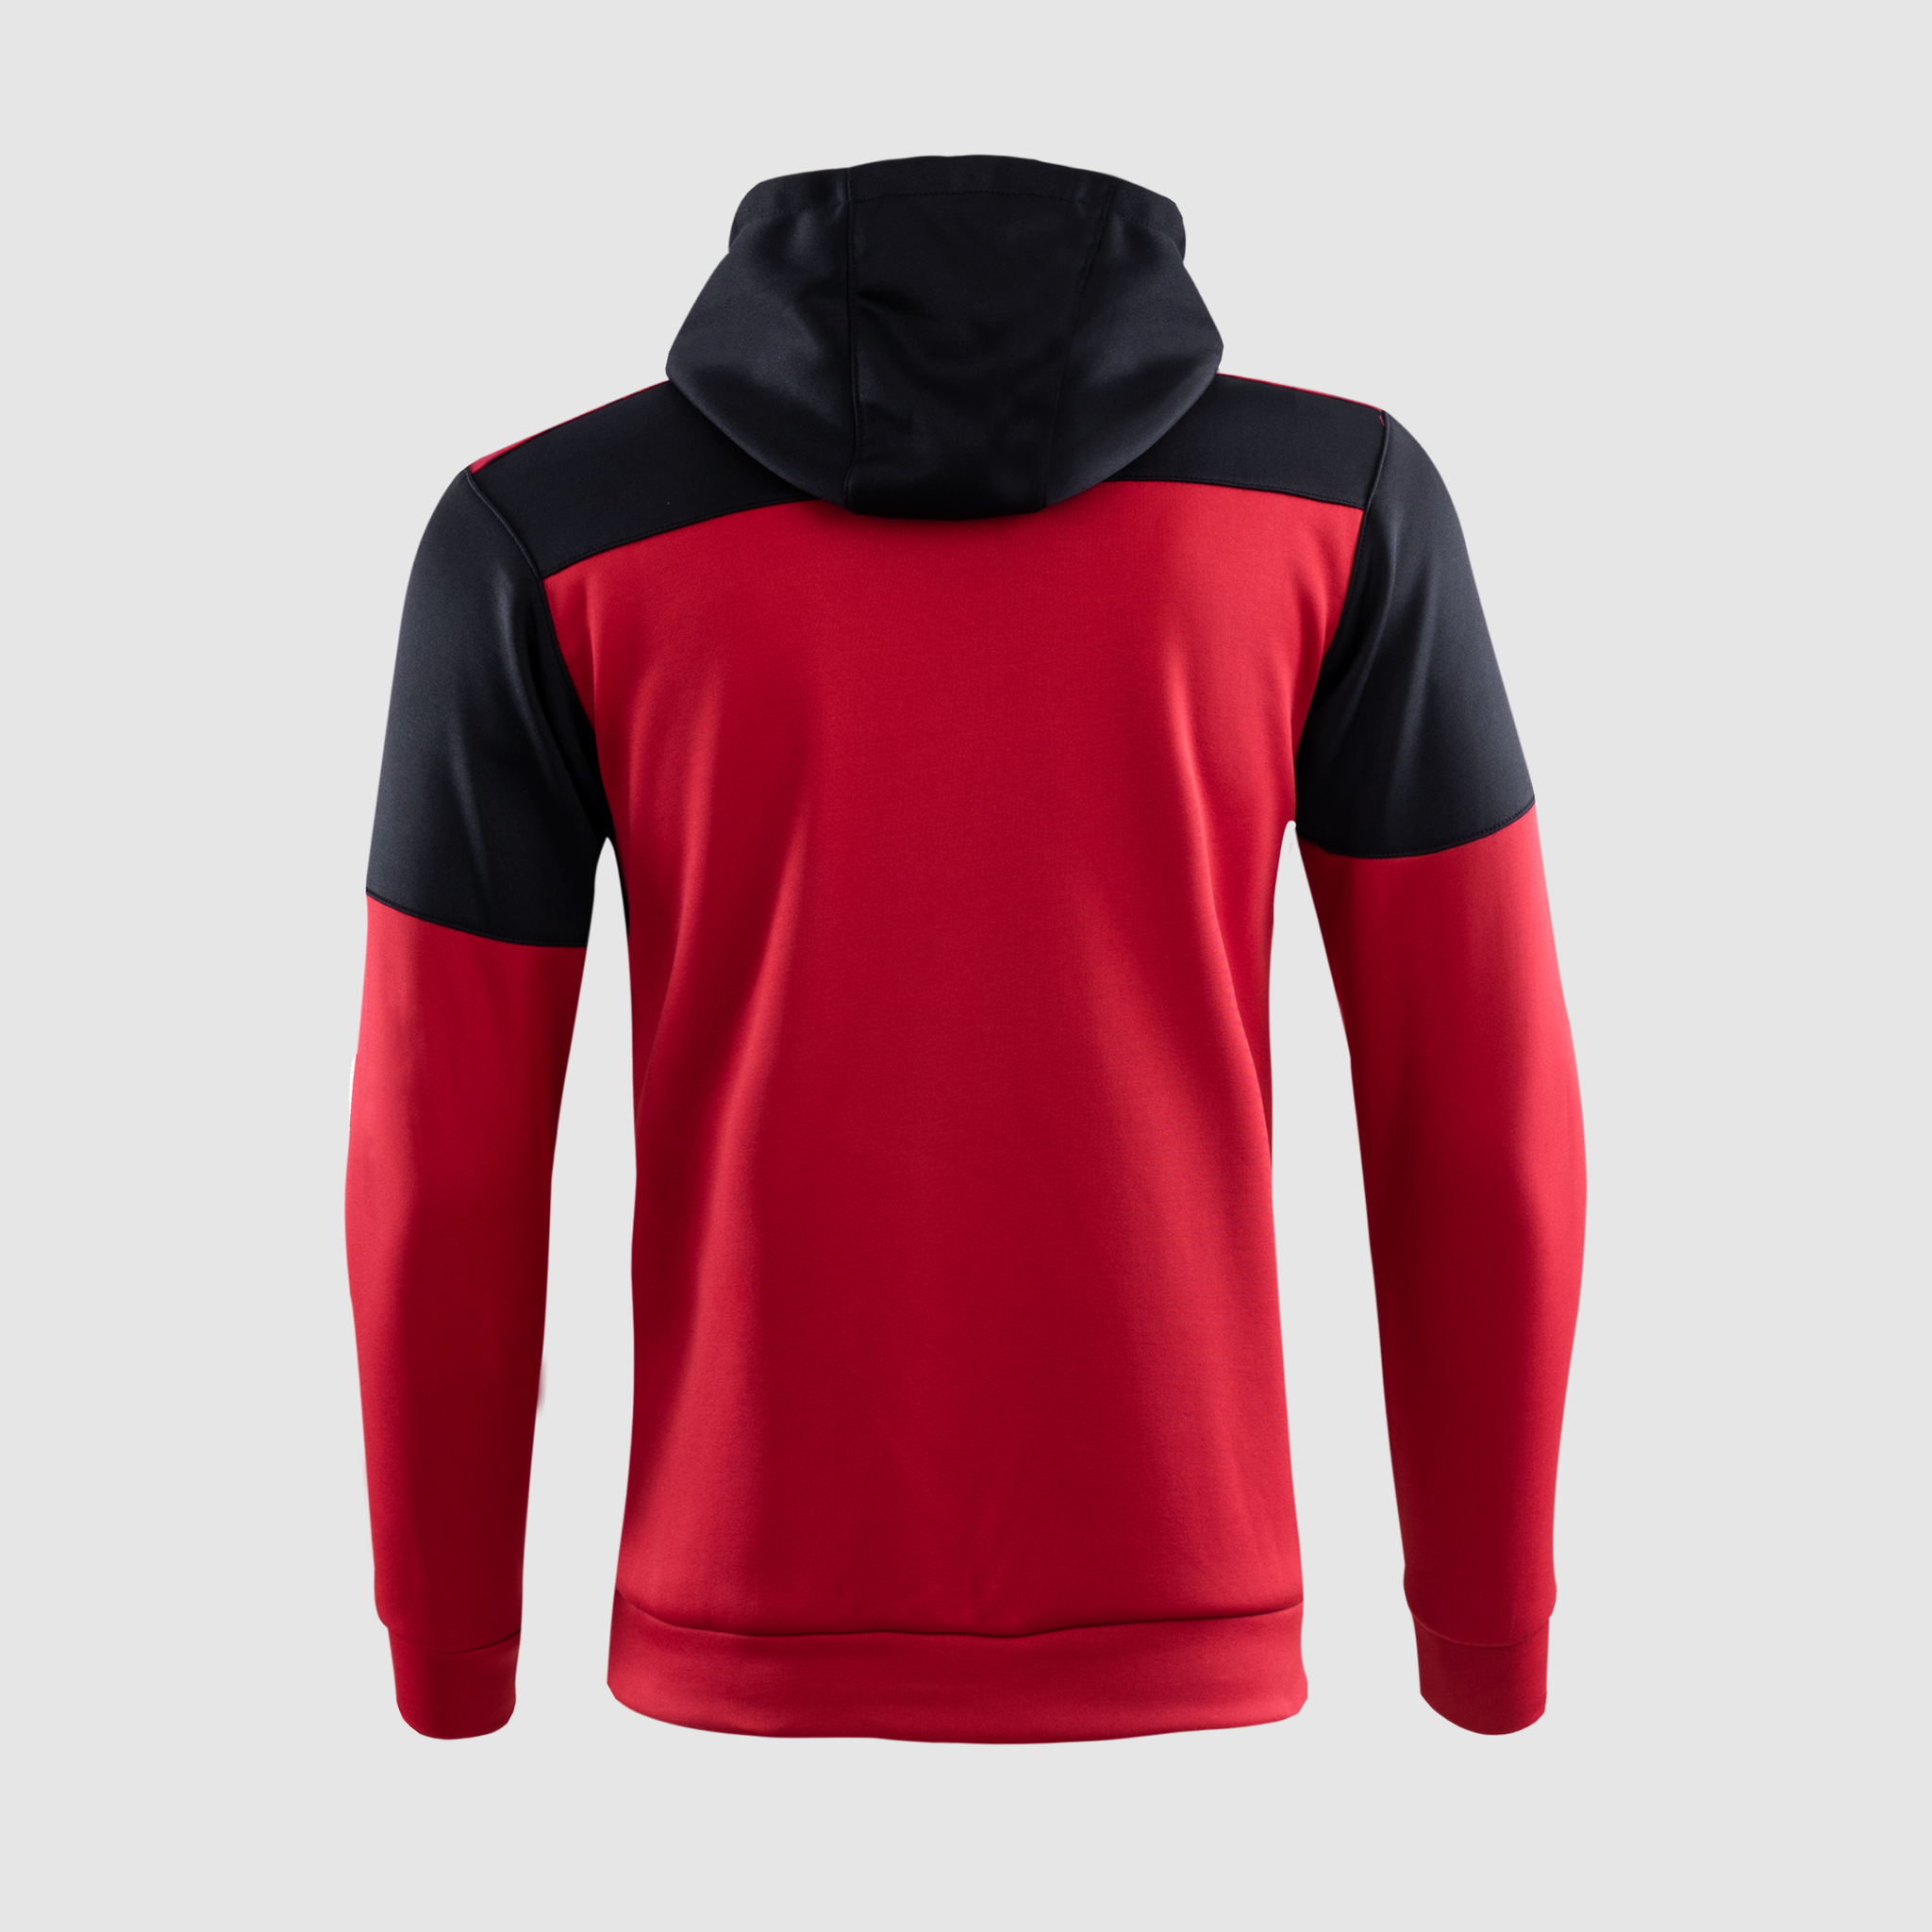 Salford Red Devils 2023 Youth Training Hoody